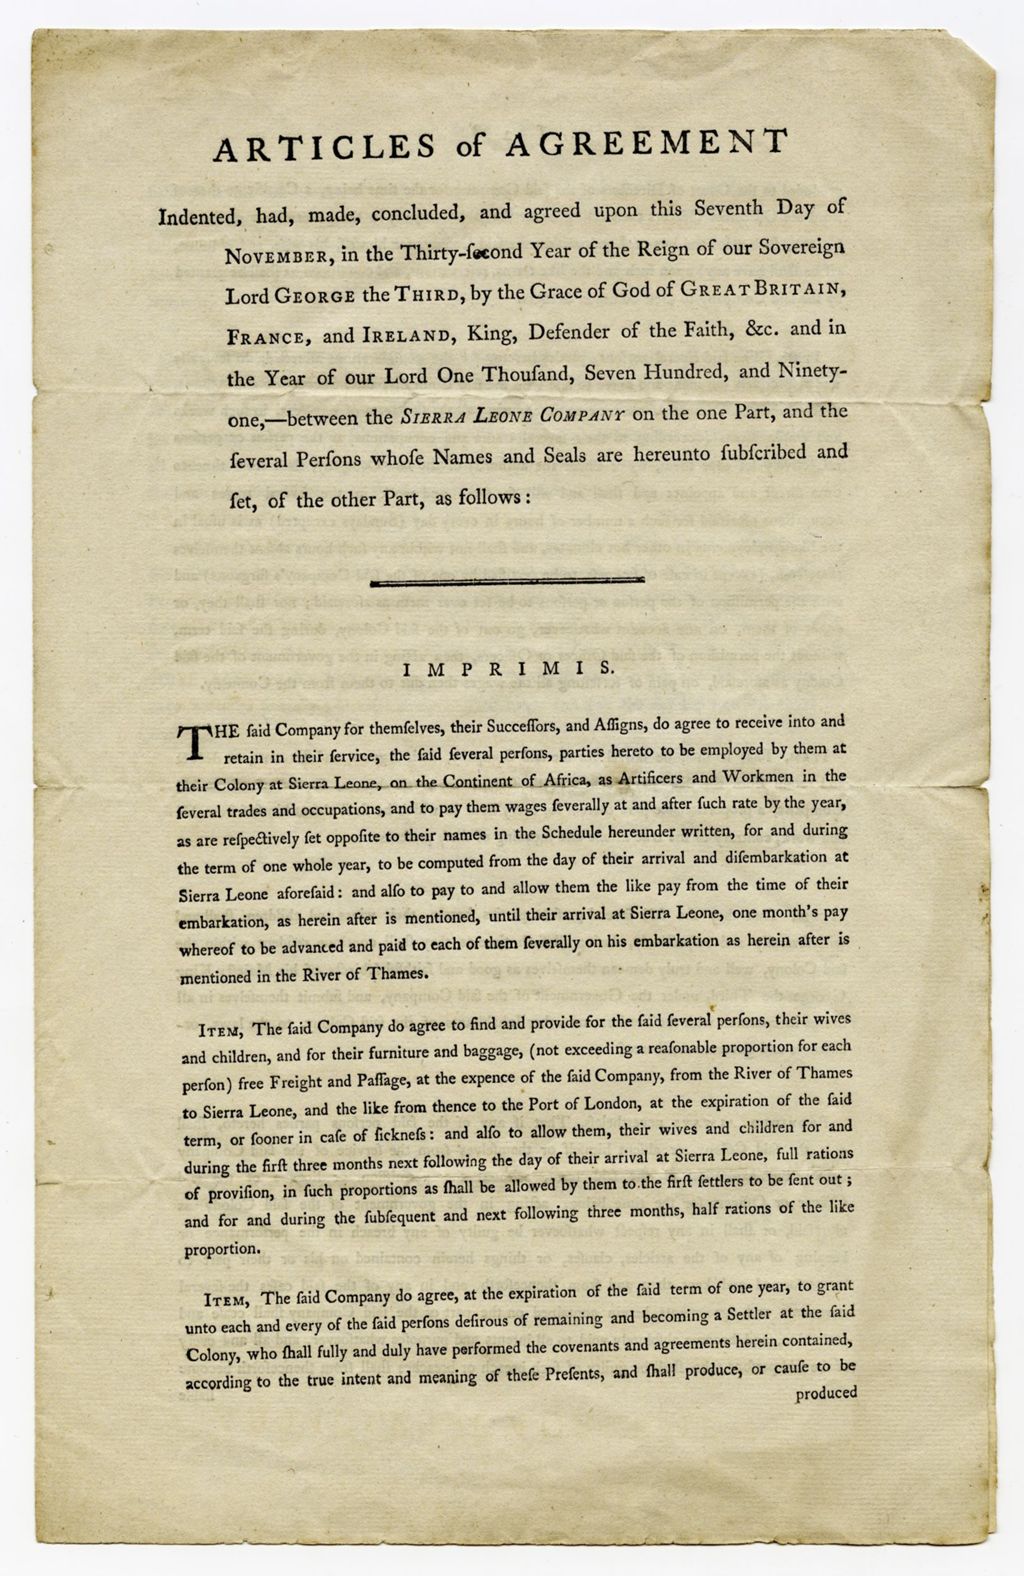 Miniature of Copy of articles of agreement between the Sierra Leone Company and their artificers